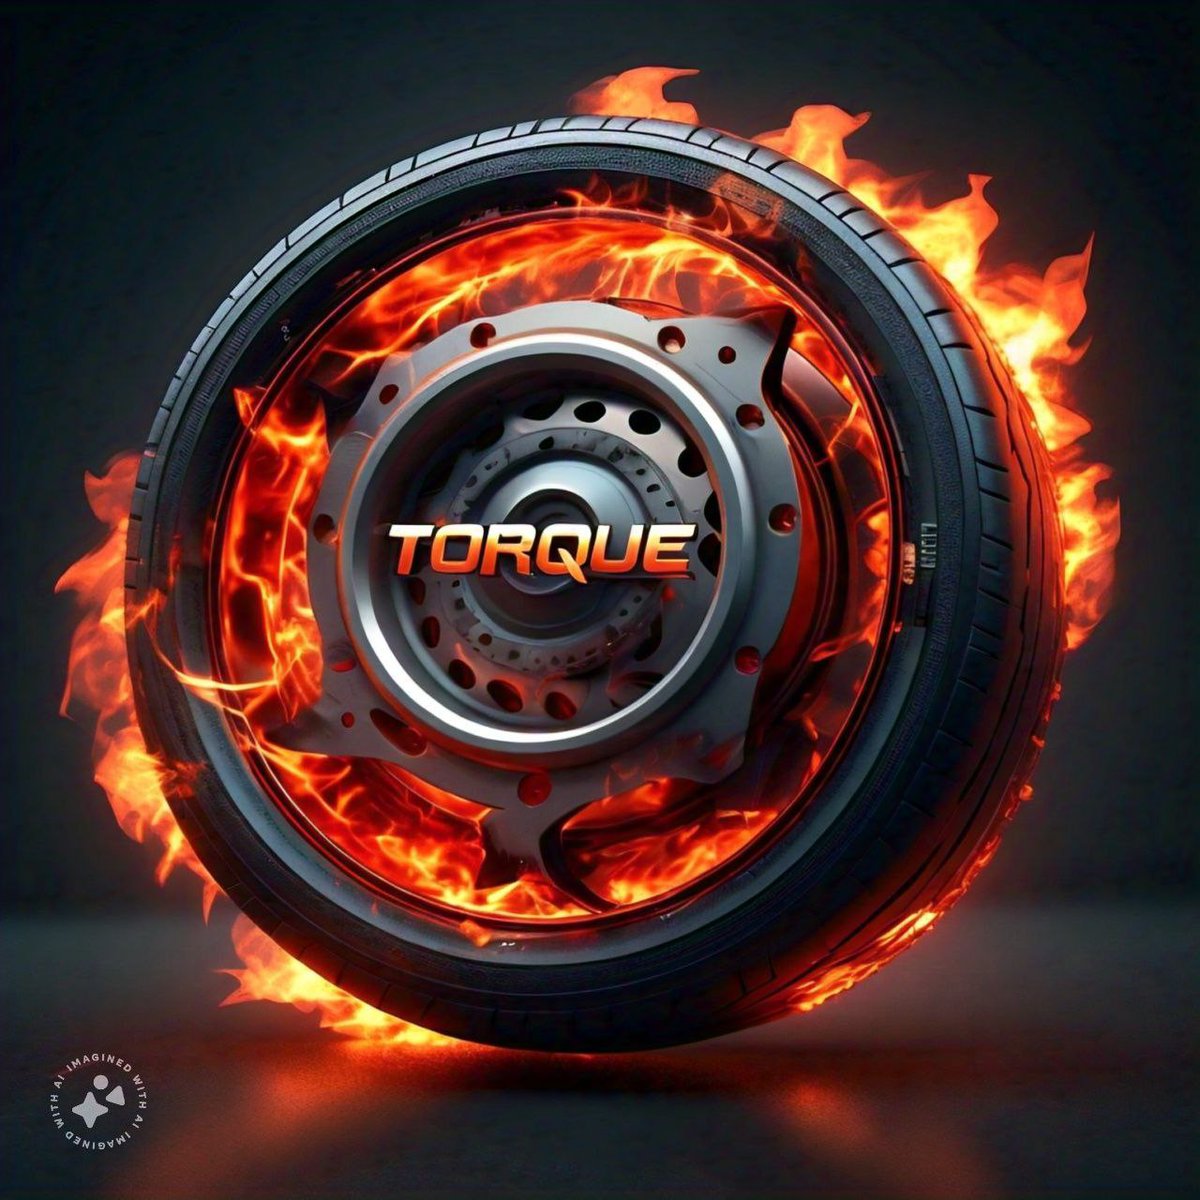 Feel the power of every revolution!🔥 Join the adrenaline-pumping action with #Torque - 🏎️💨 Ignite your engines and let's make some smoke! #SpeedDemons #RacingThrills 🏁 #FullThrottleExcitement
Unleash the beast within! 🏎️ #CarLove #AdrenalineJunkies #SpeedDemons #RacingLife…